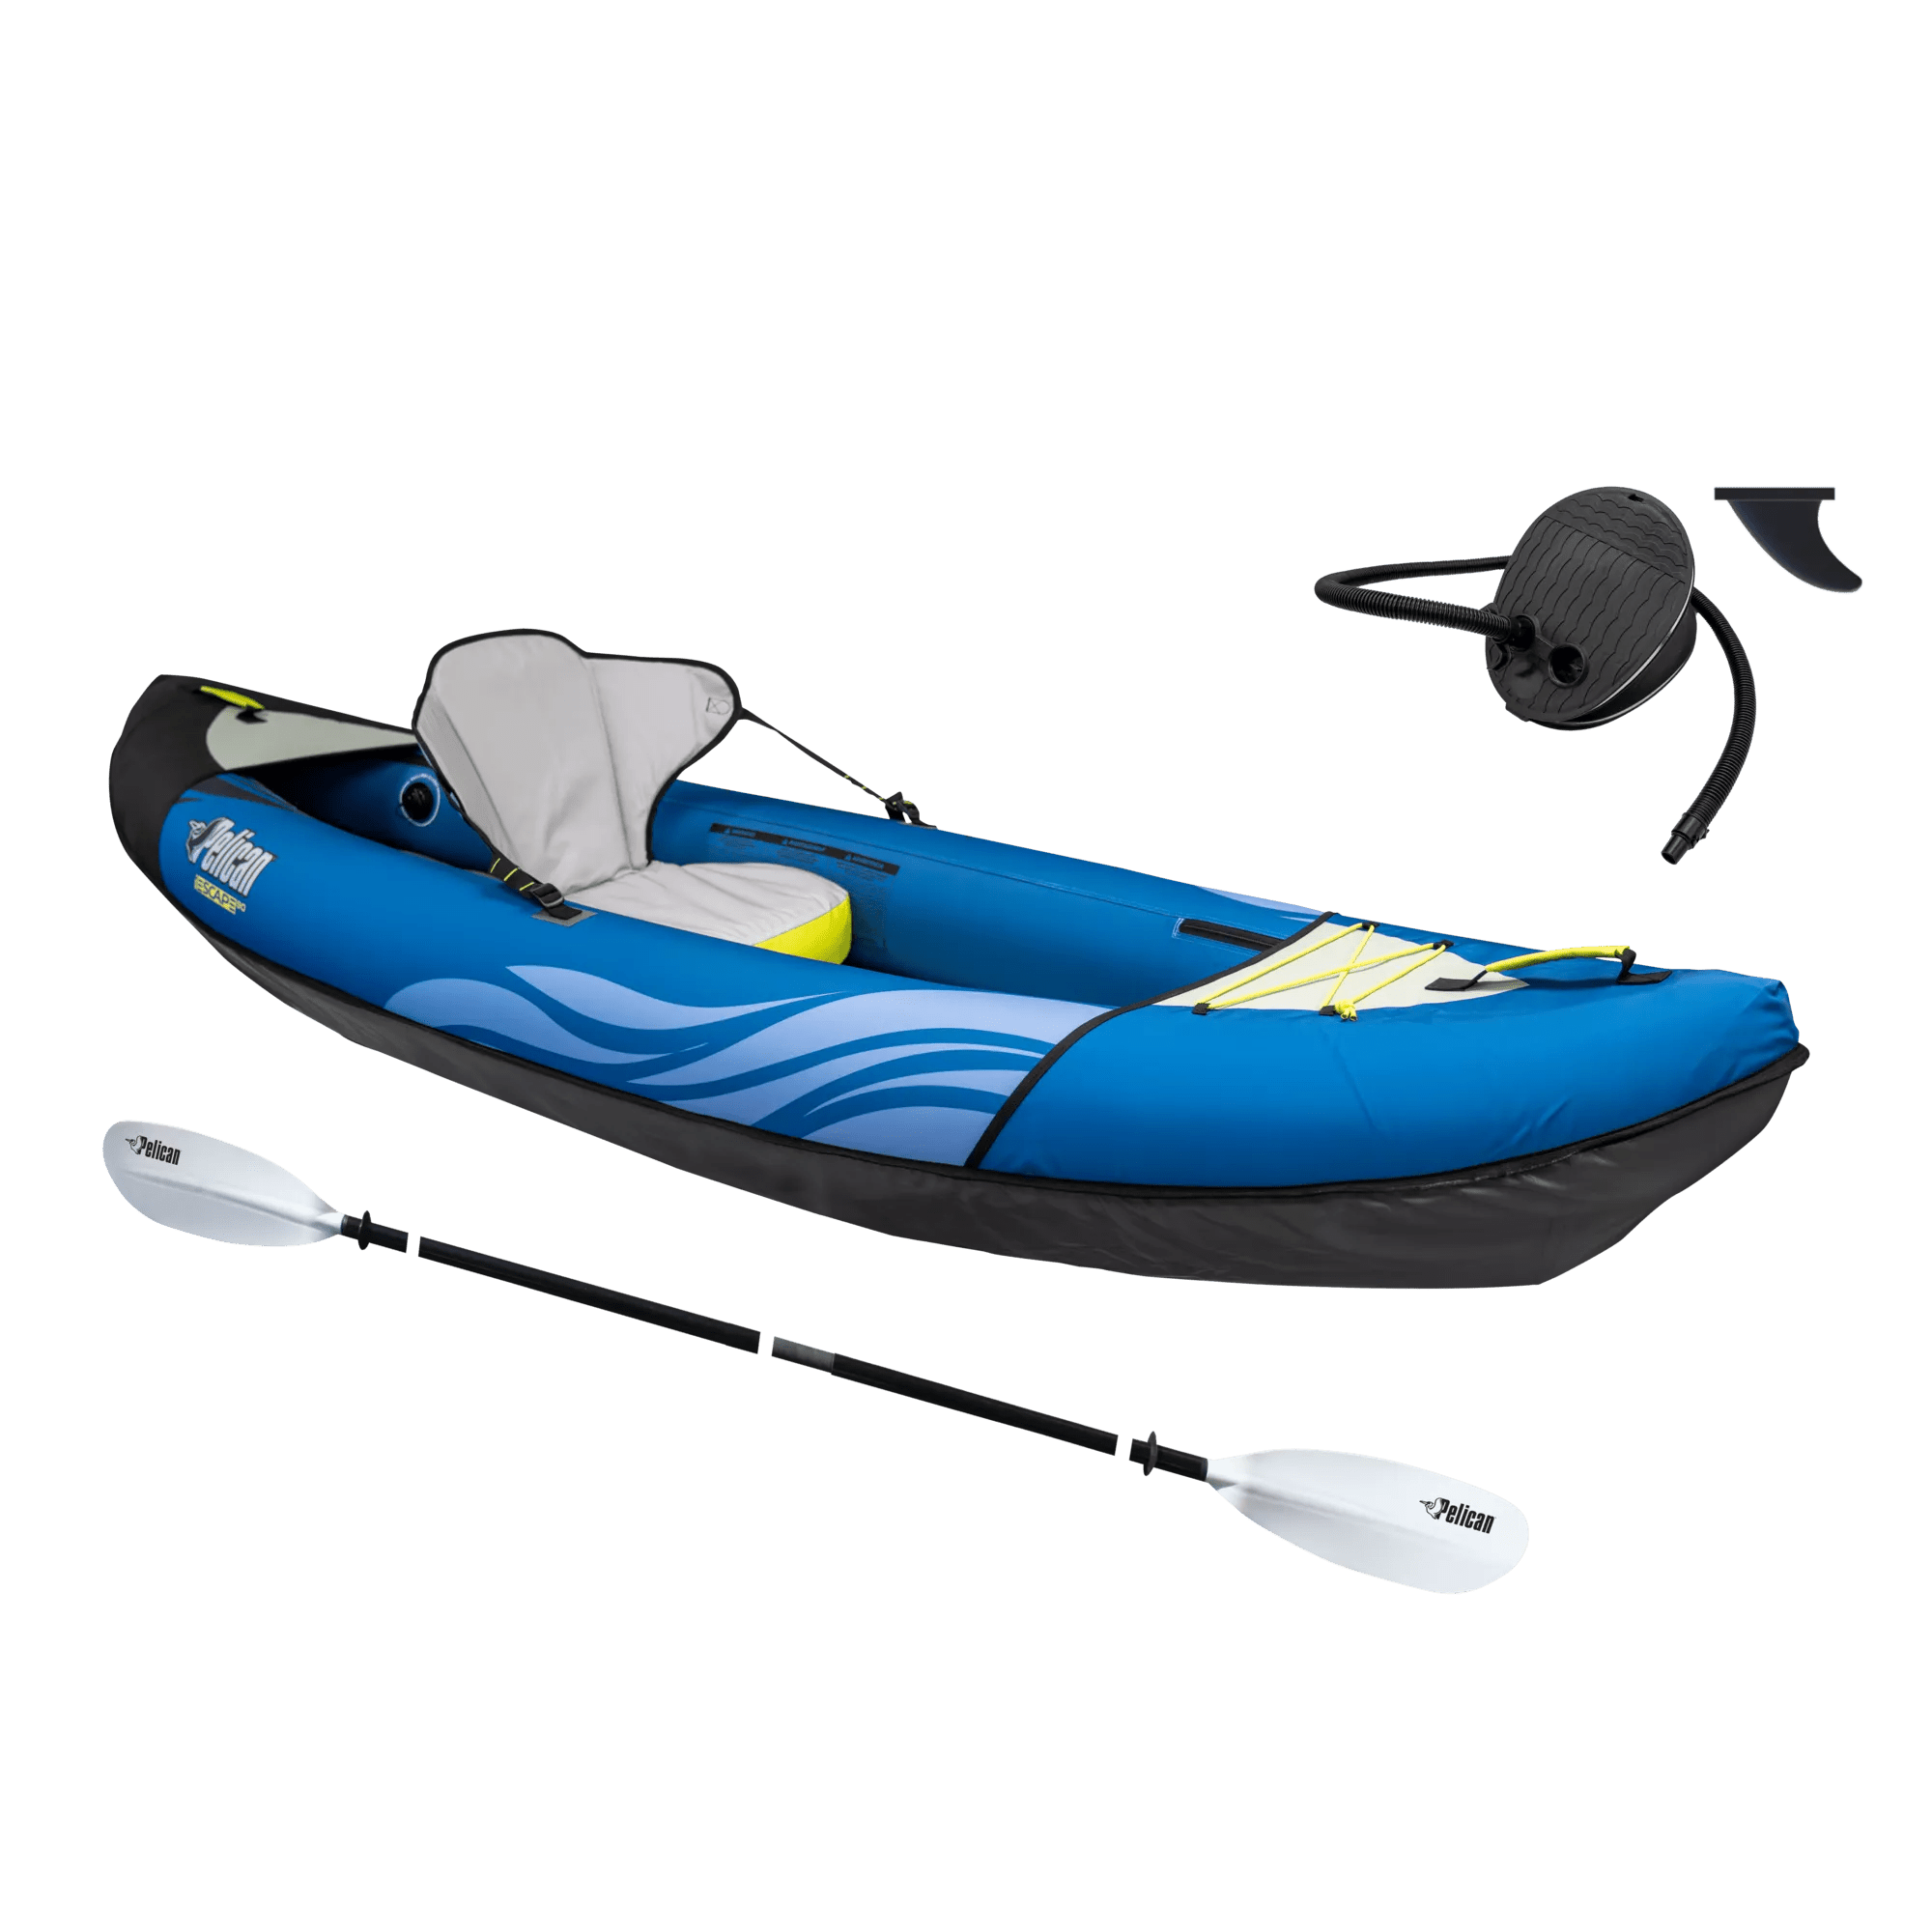 PELICAN - Inflatable Kayak iESCAPE 90 - Blue - MMG09P104 - ISO 